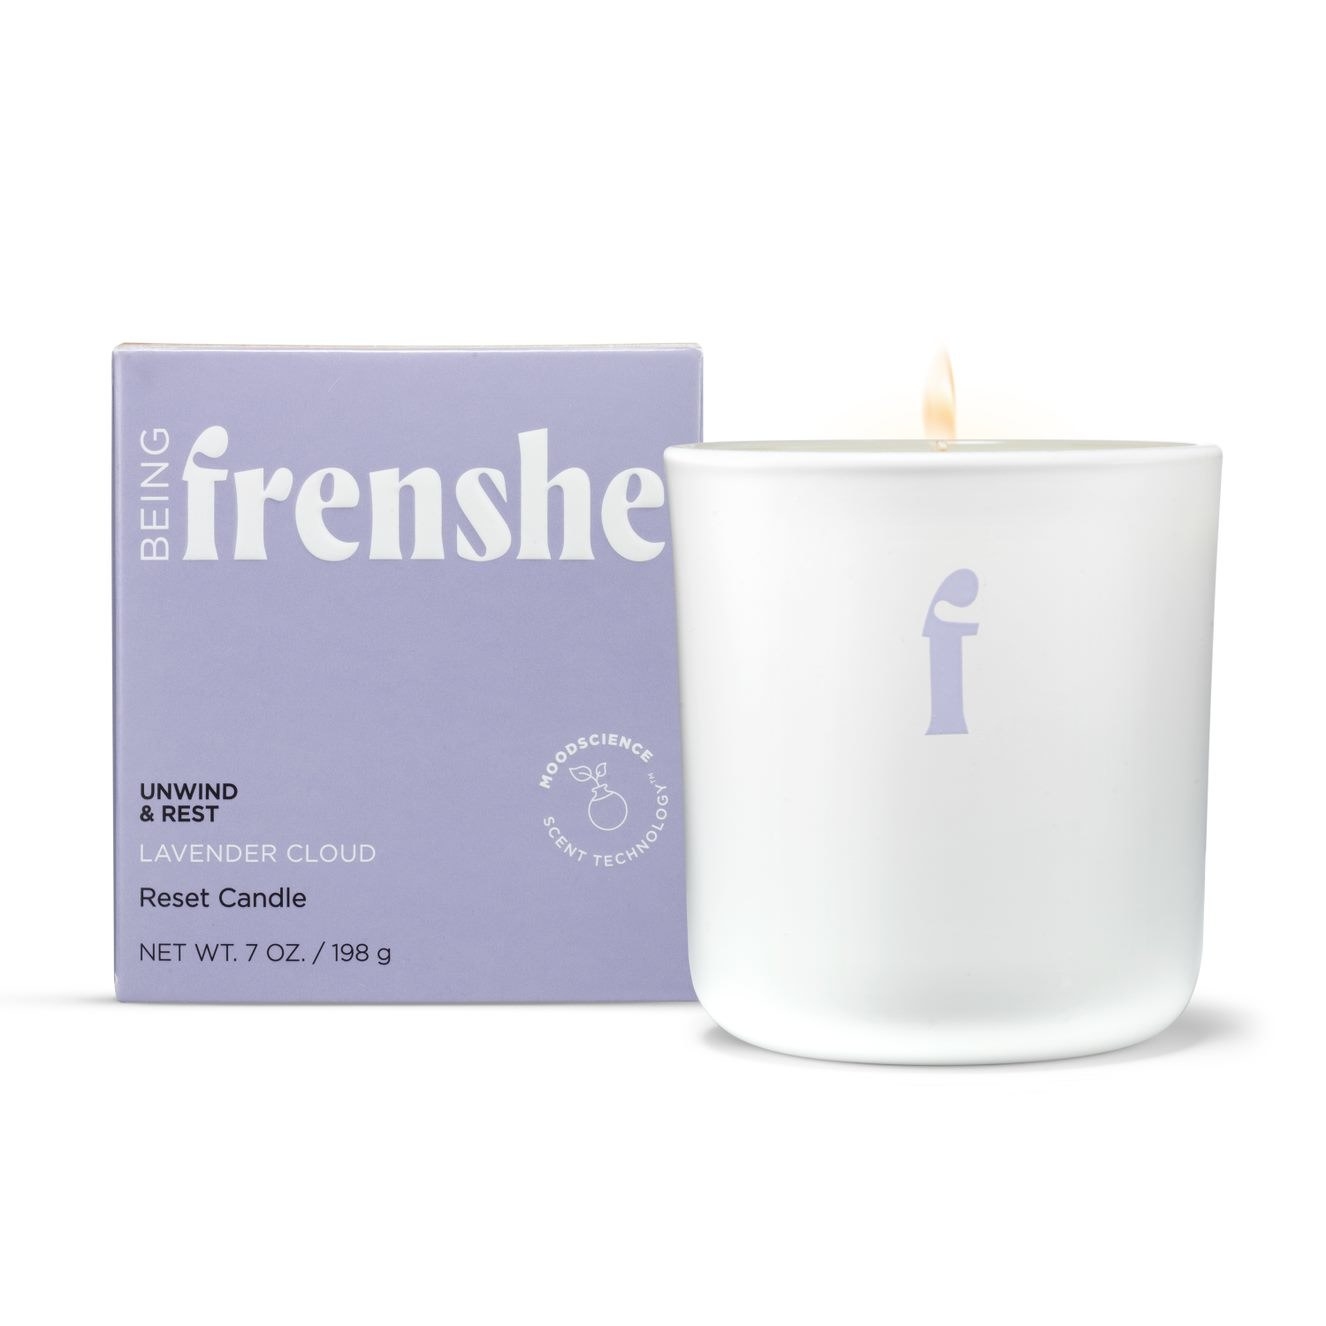 Being Frenshe Reset Candle In Lavender Cloud - 7oz